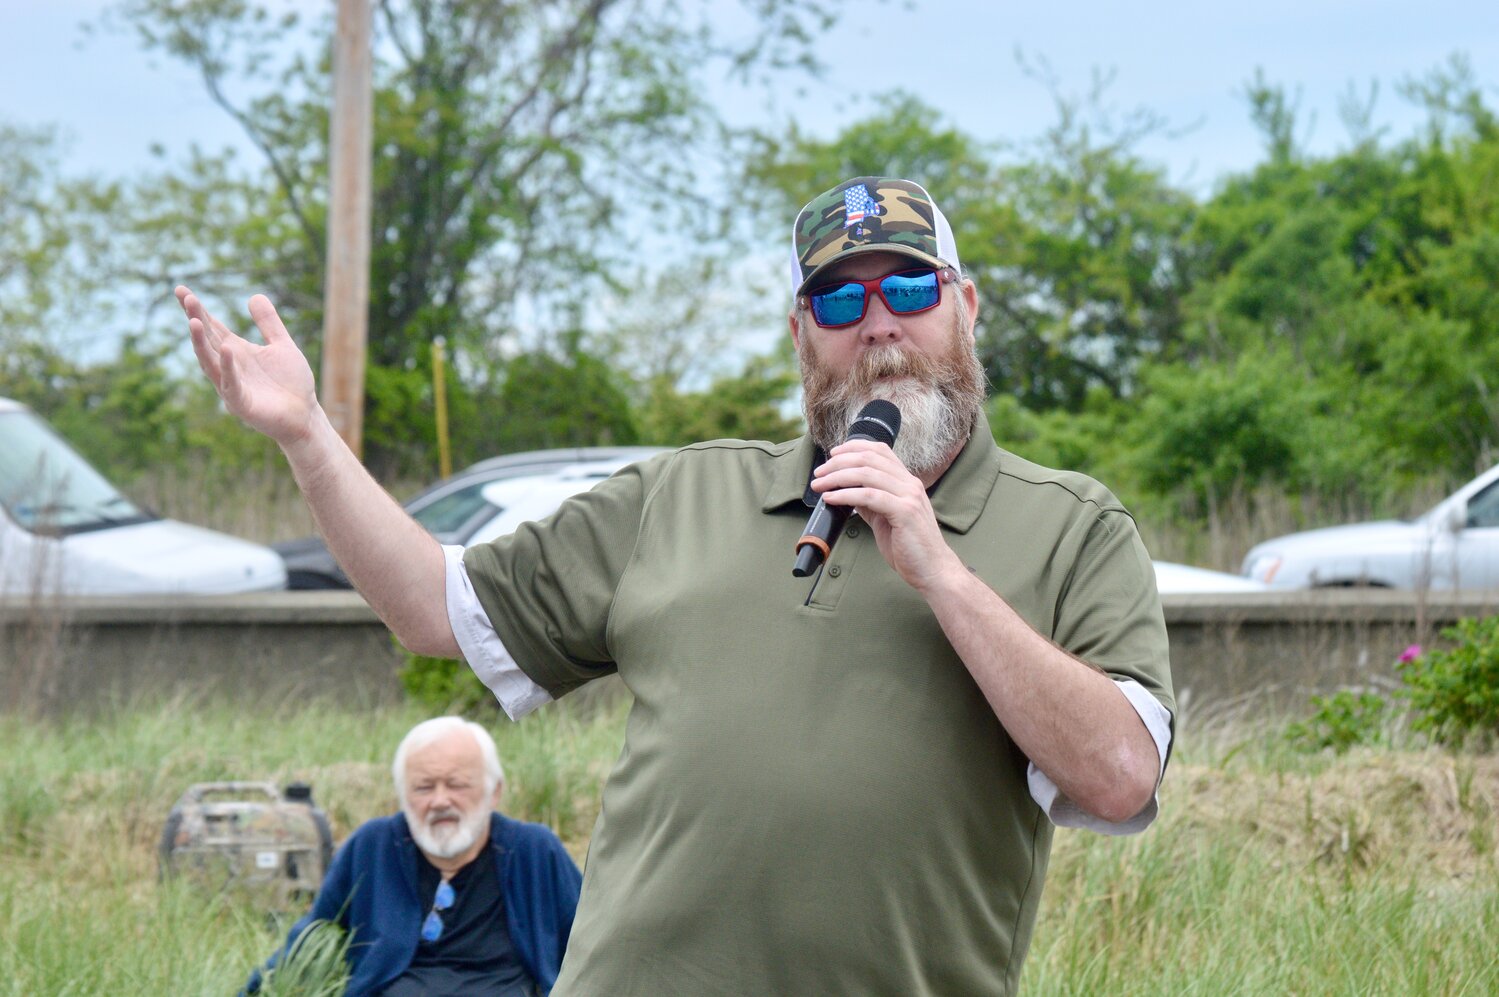 Speaking at Saturday’s rally at Island Park Beach, Portsmouth small business owner and fisherman Ralph Craft said offshore wind developers need to “do their due diligence in finding out what they’re going to do to the marine life.”